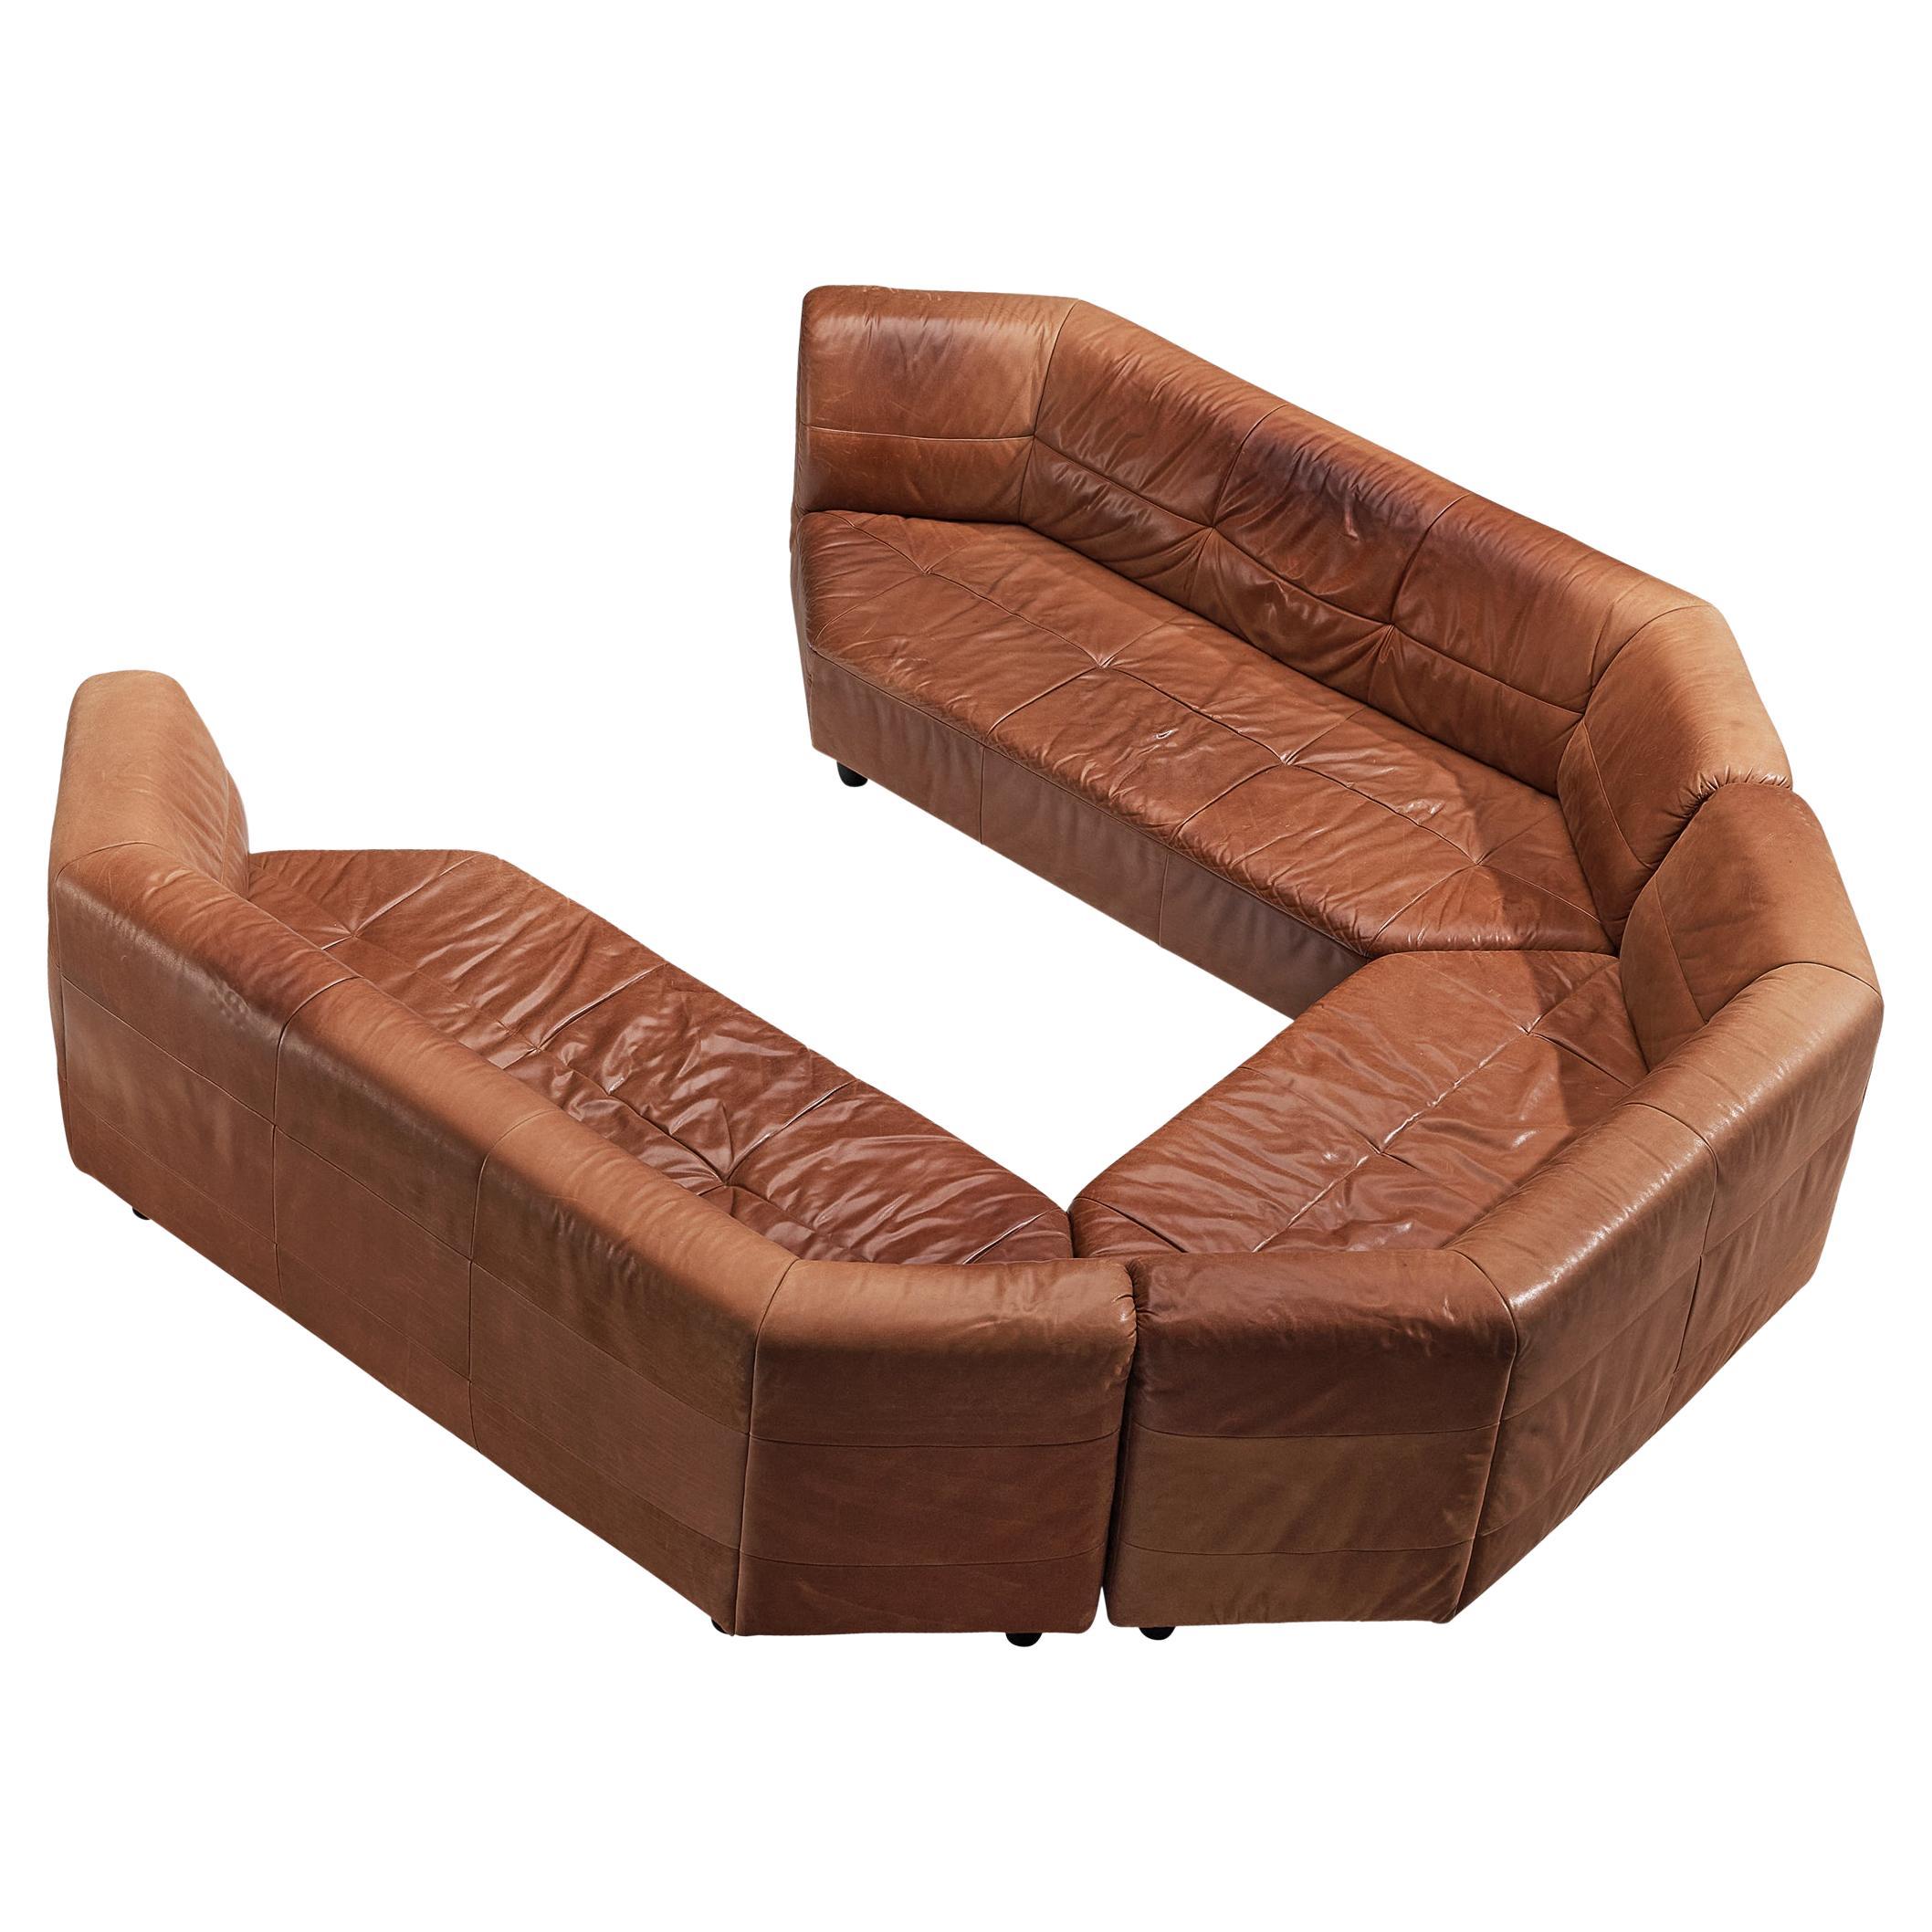 Grand Geometric Sectional Sofa in Cognac Brown Leather 